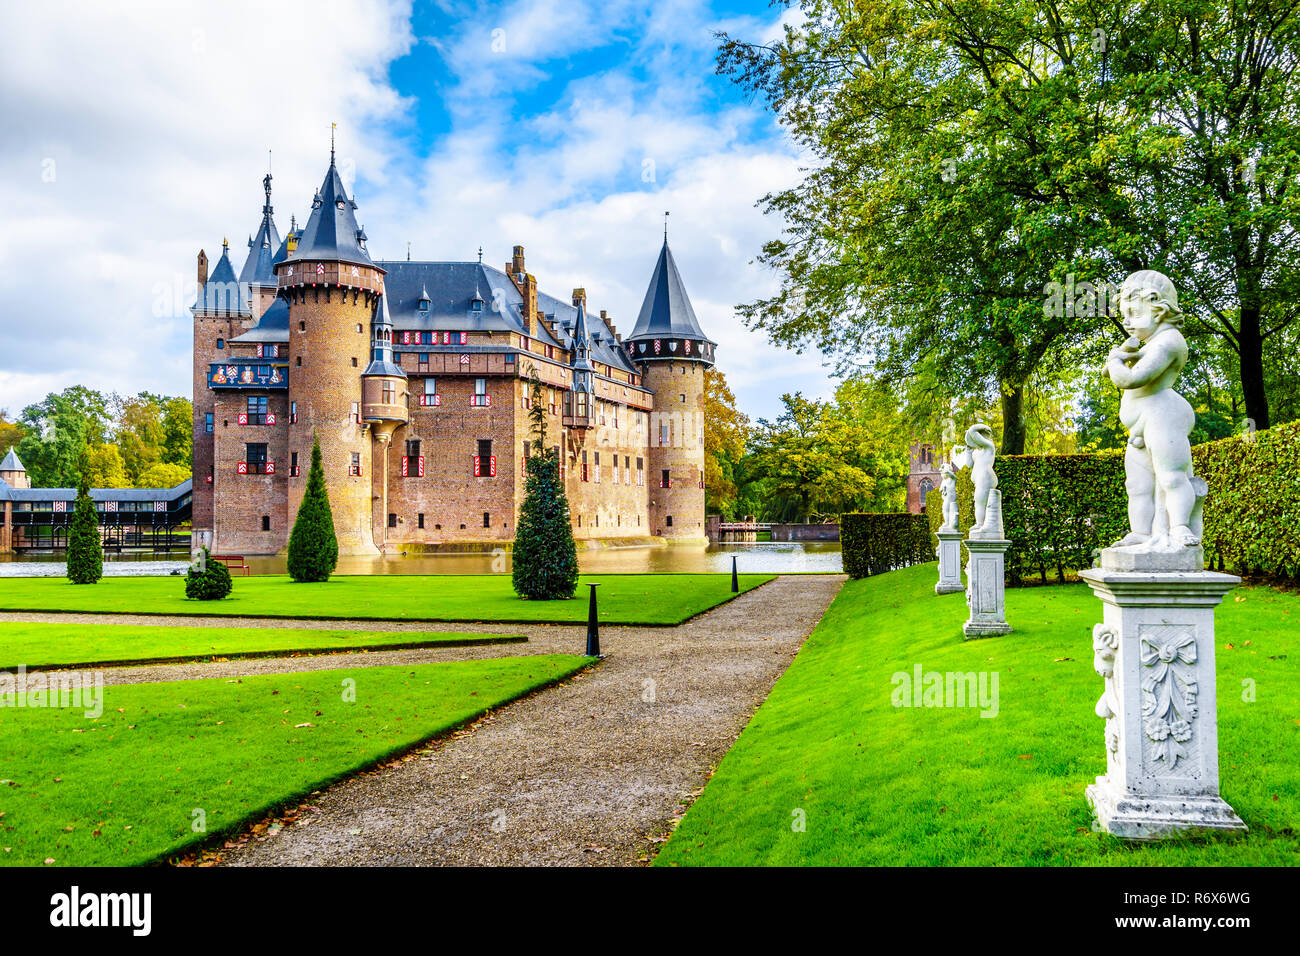 Magnificent Castle De Haar surrounded by beautiful manicured Gardens. A 14th century Castle that was completely restored in the late 19th century Stock Photo